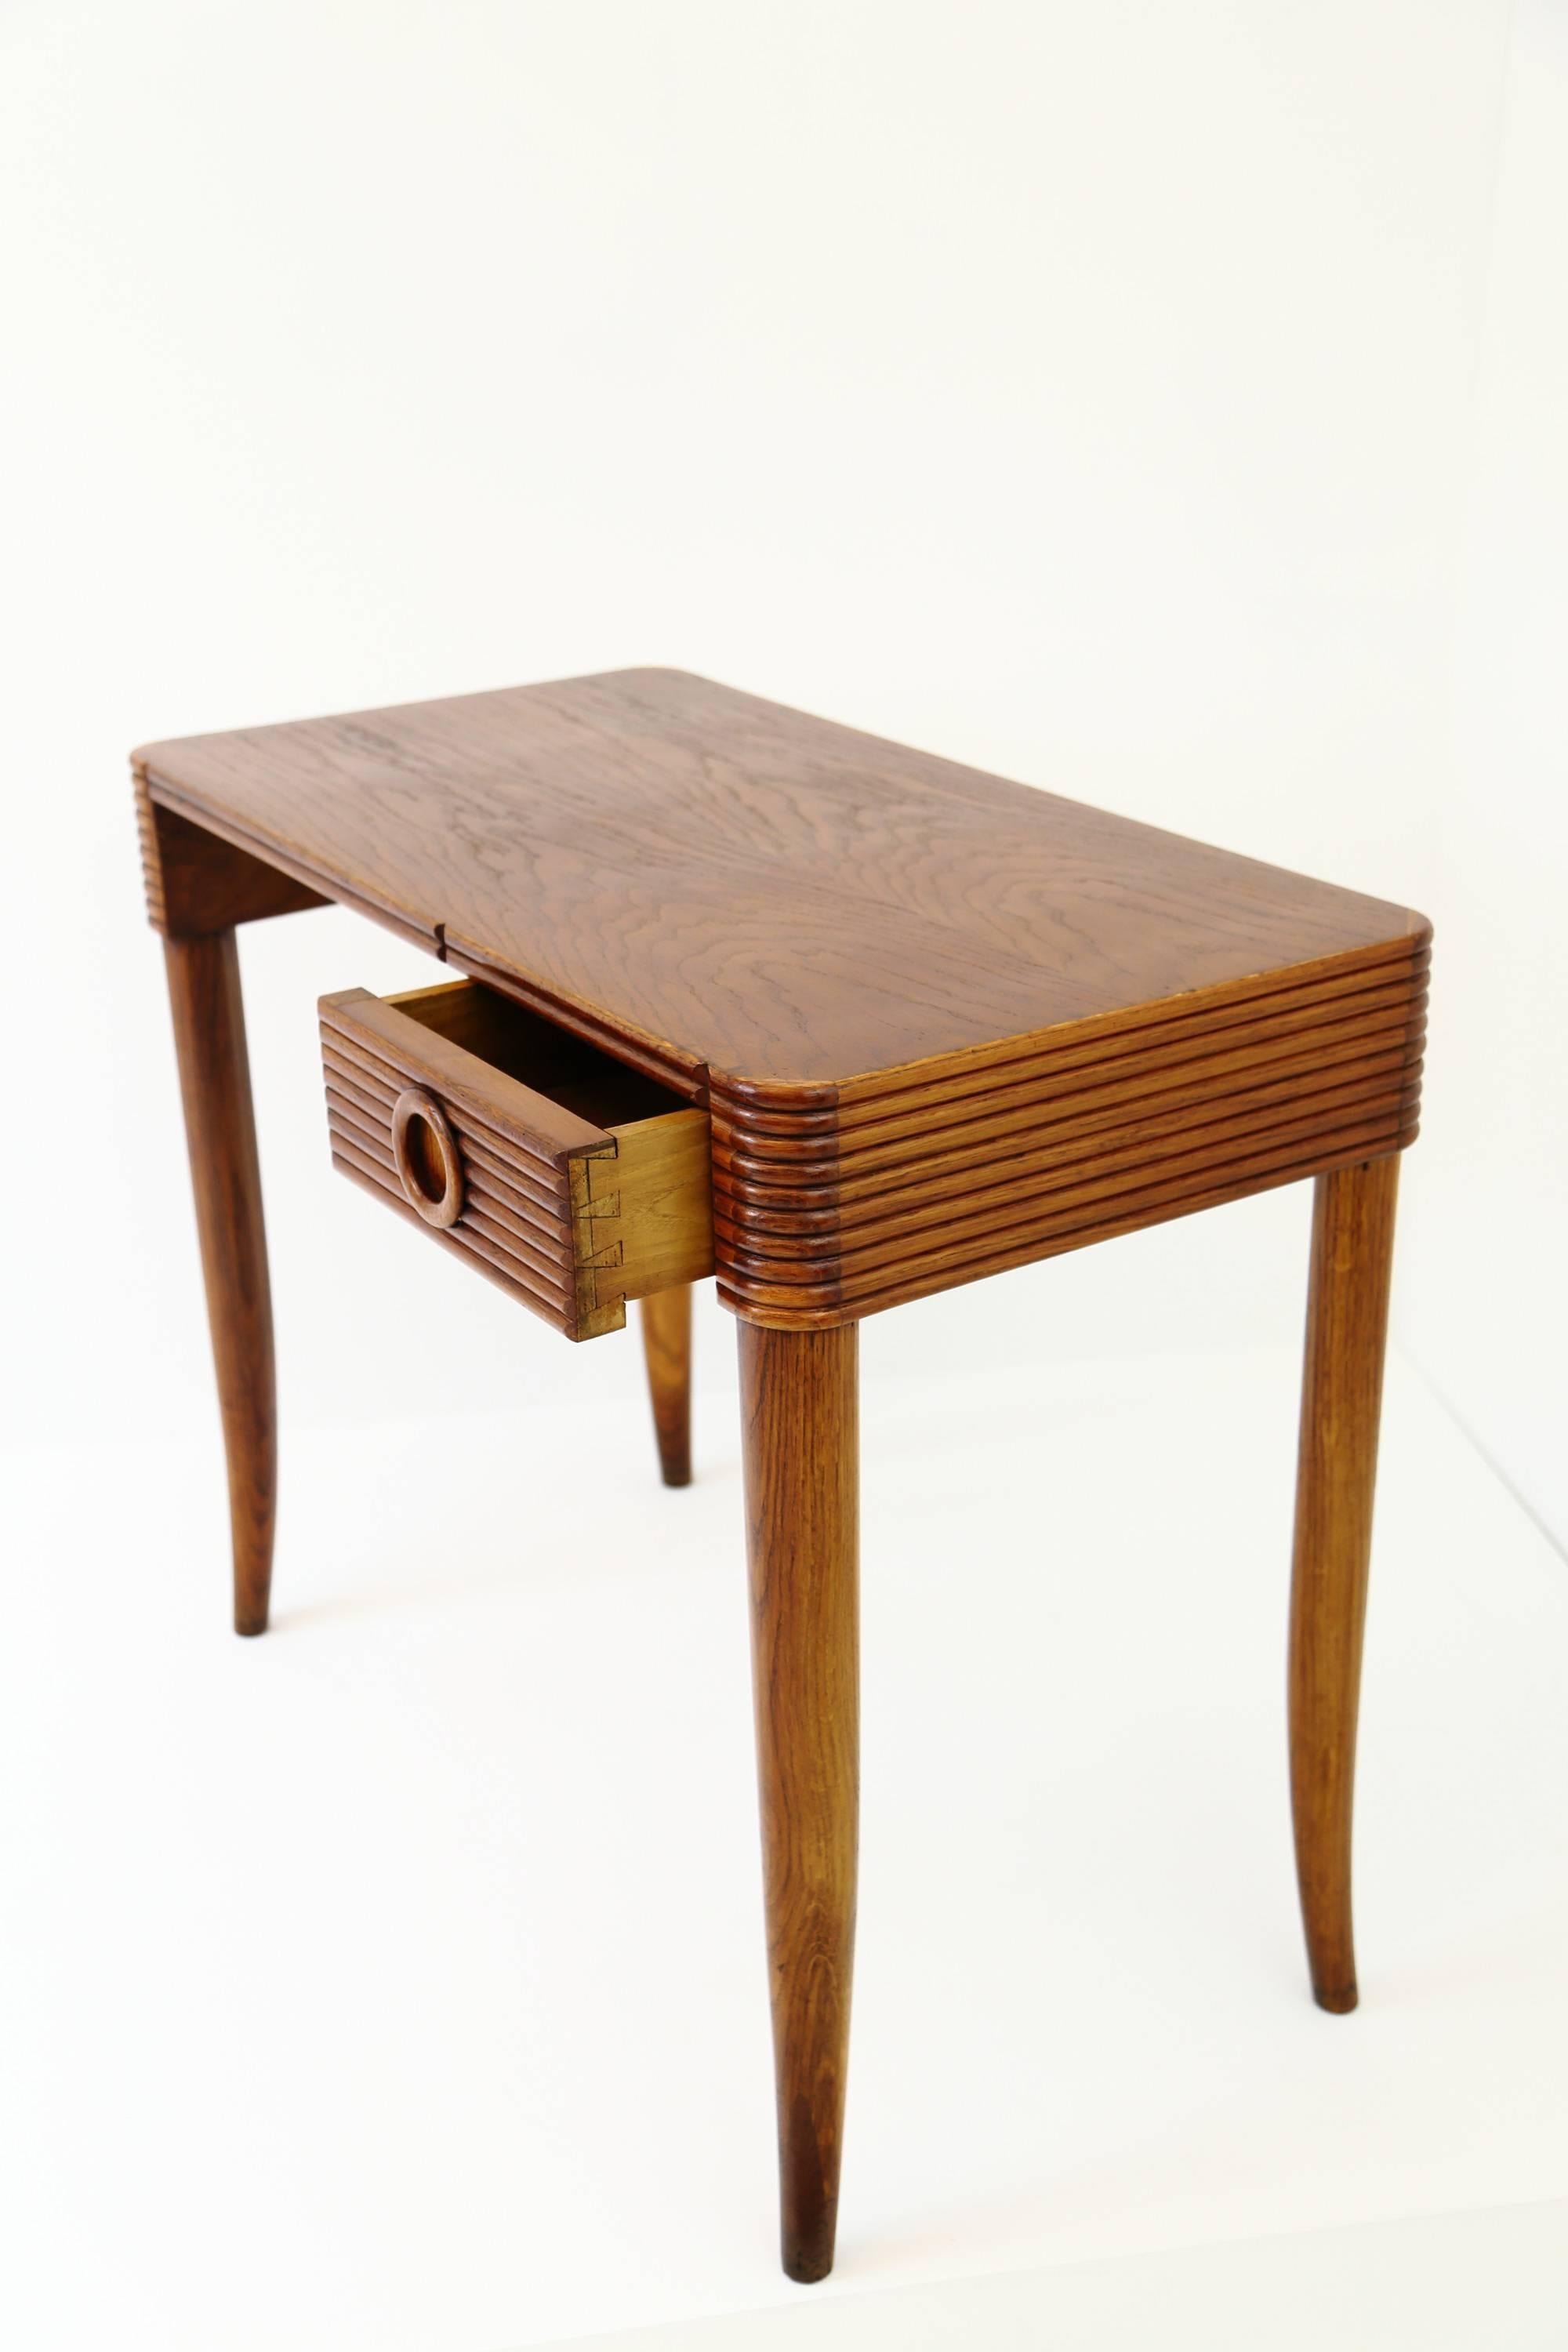 A stained, solid walnut writing desk by the architect and designer Melchiorre Bega. The desk has soft, rounded corners and features beautiful, decorative ‘reeding’ around its perimeter. A useful, small drawer with a carved, circular pull sits on the